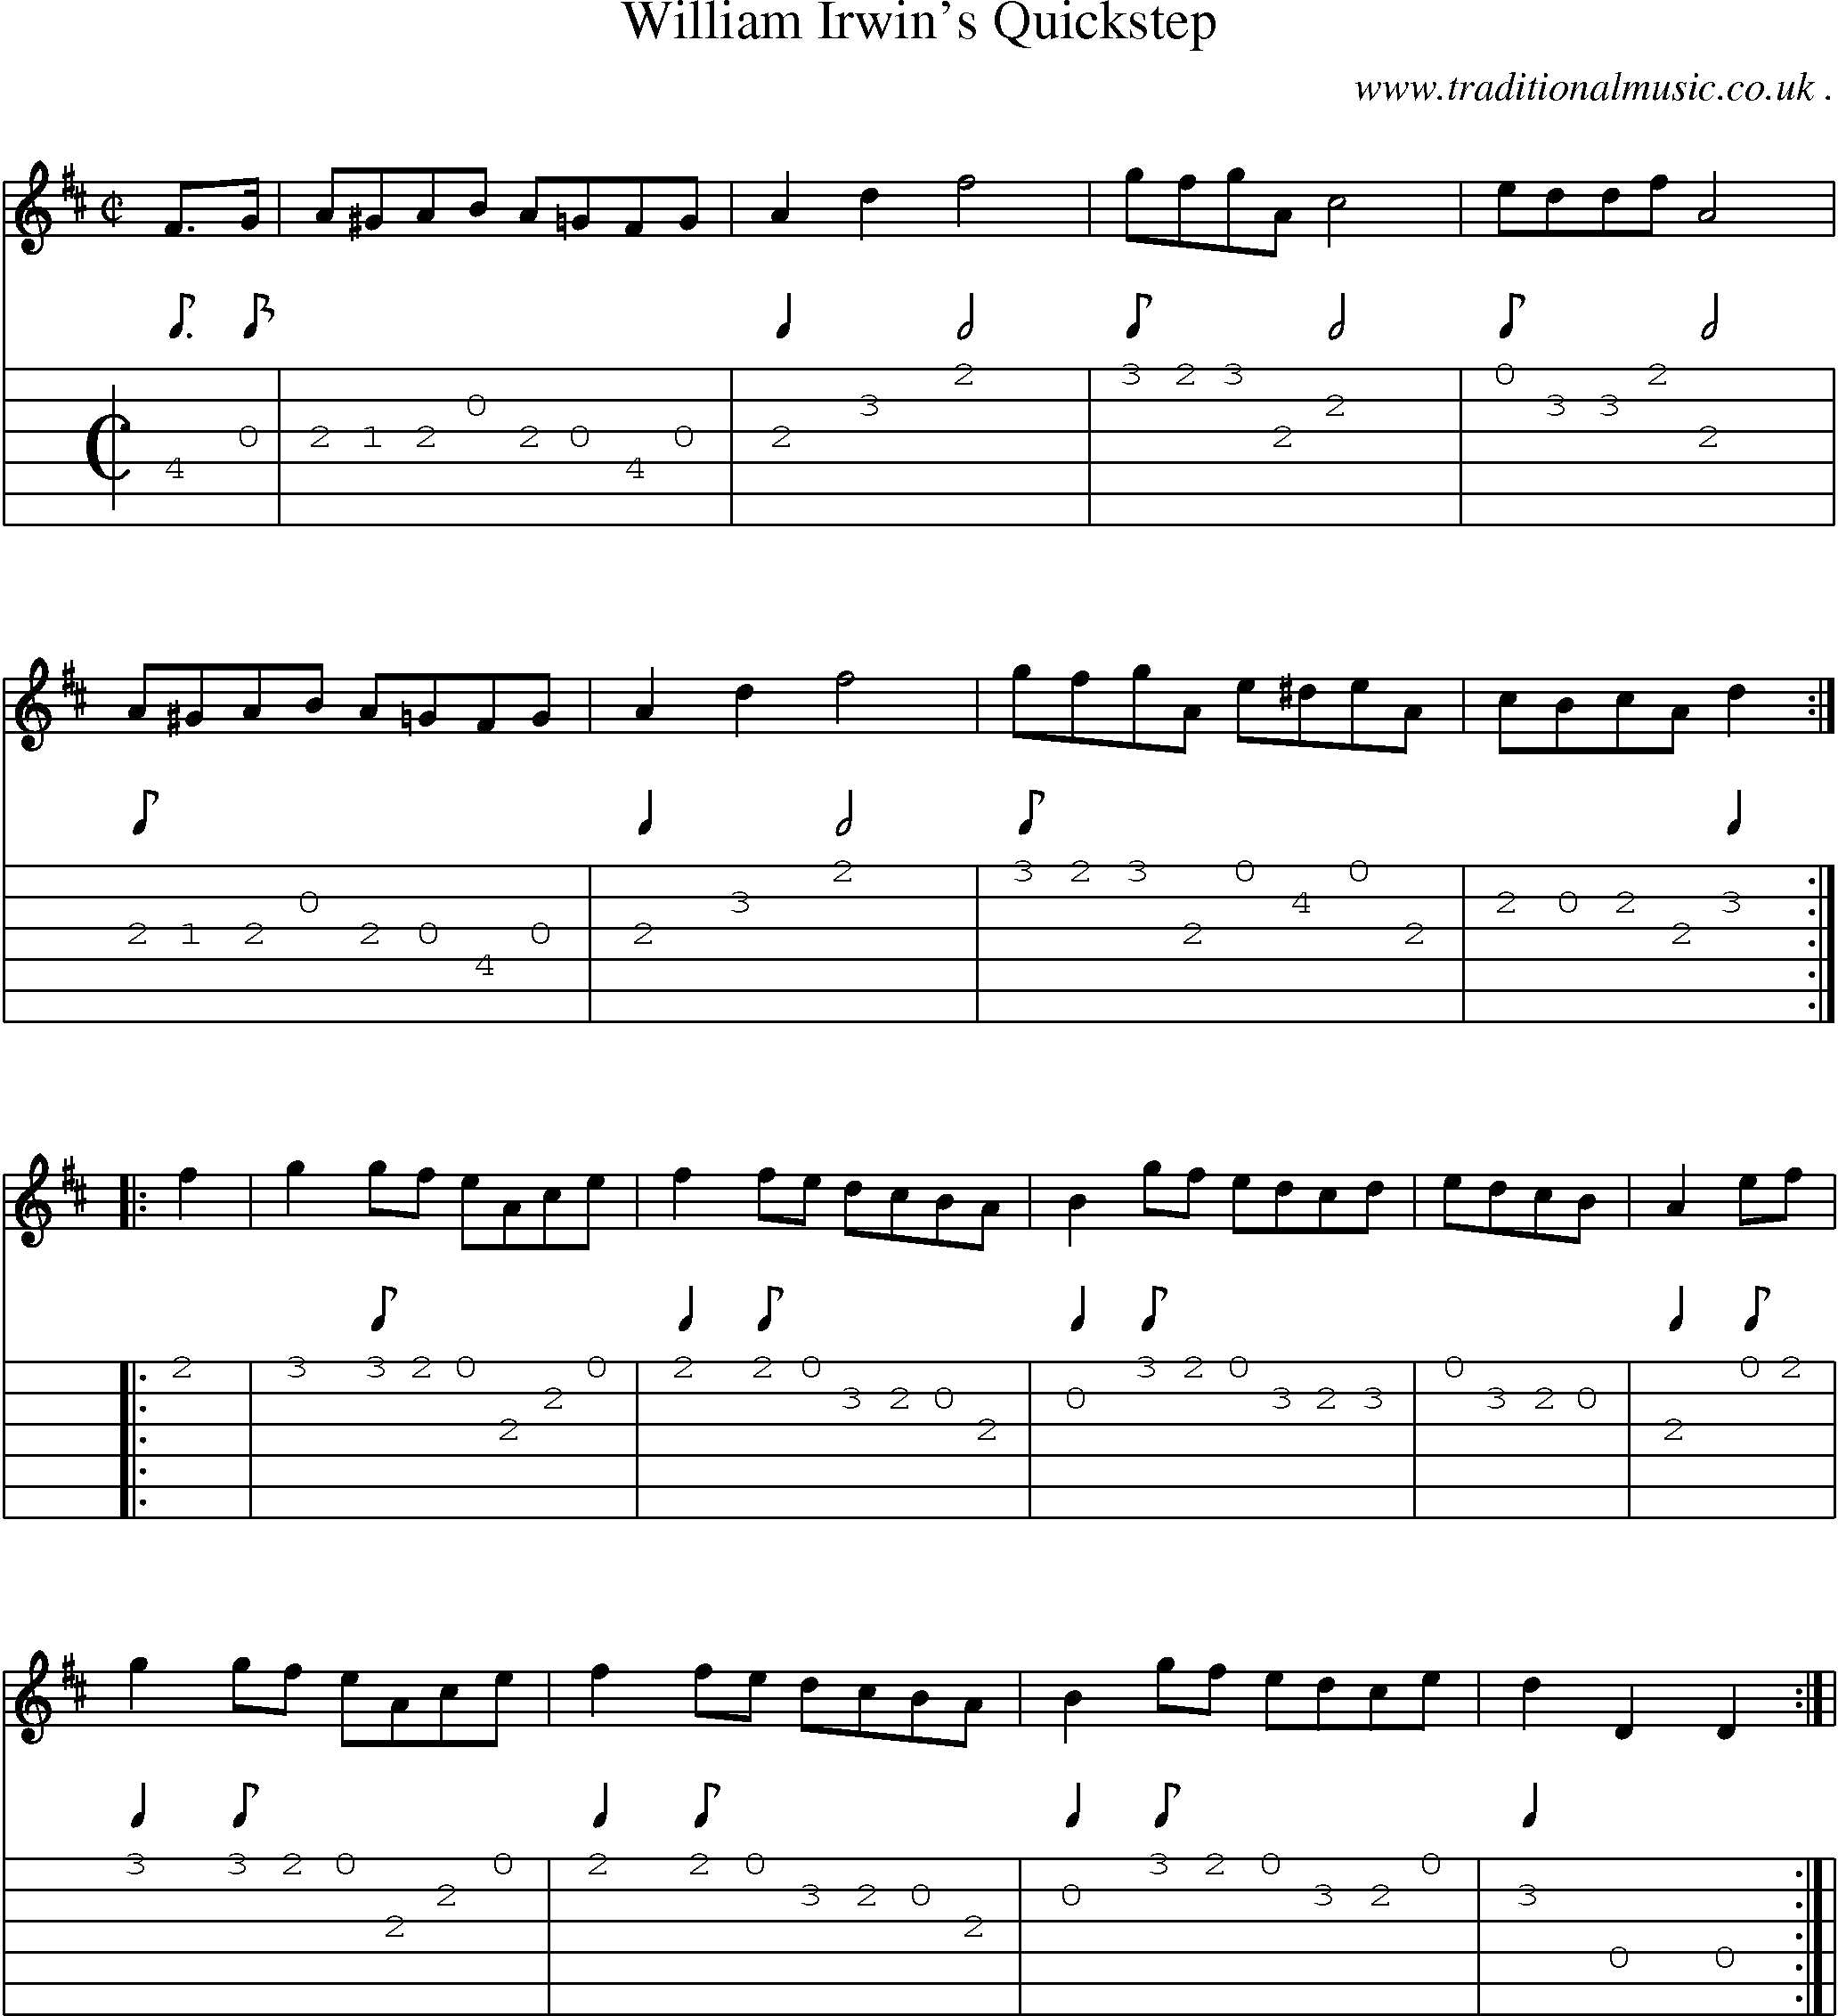 Sheet-Music and Guitar Tabs for William Irwins Quickstep